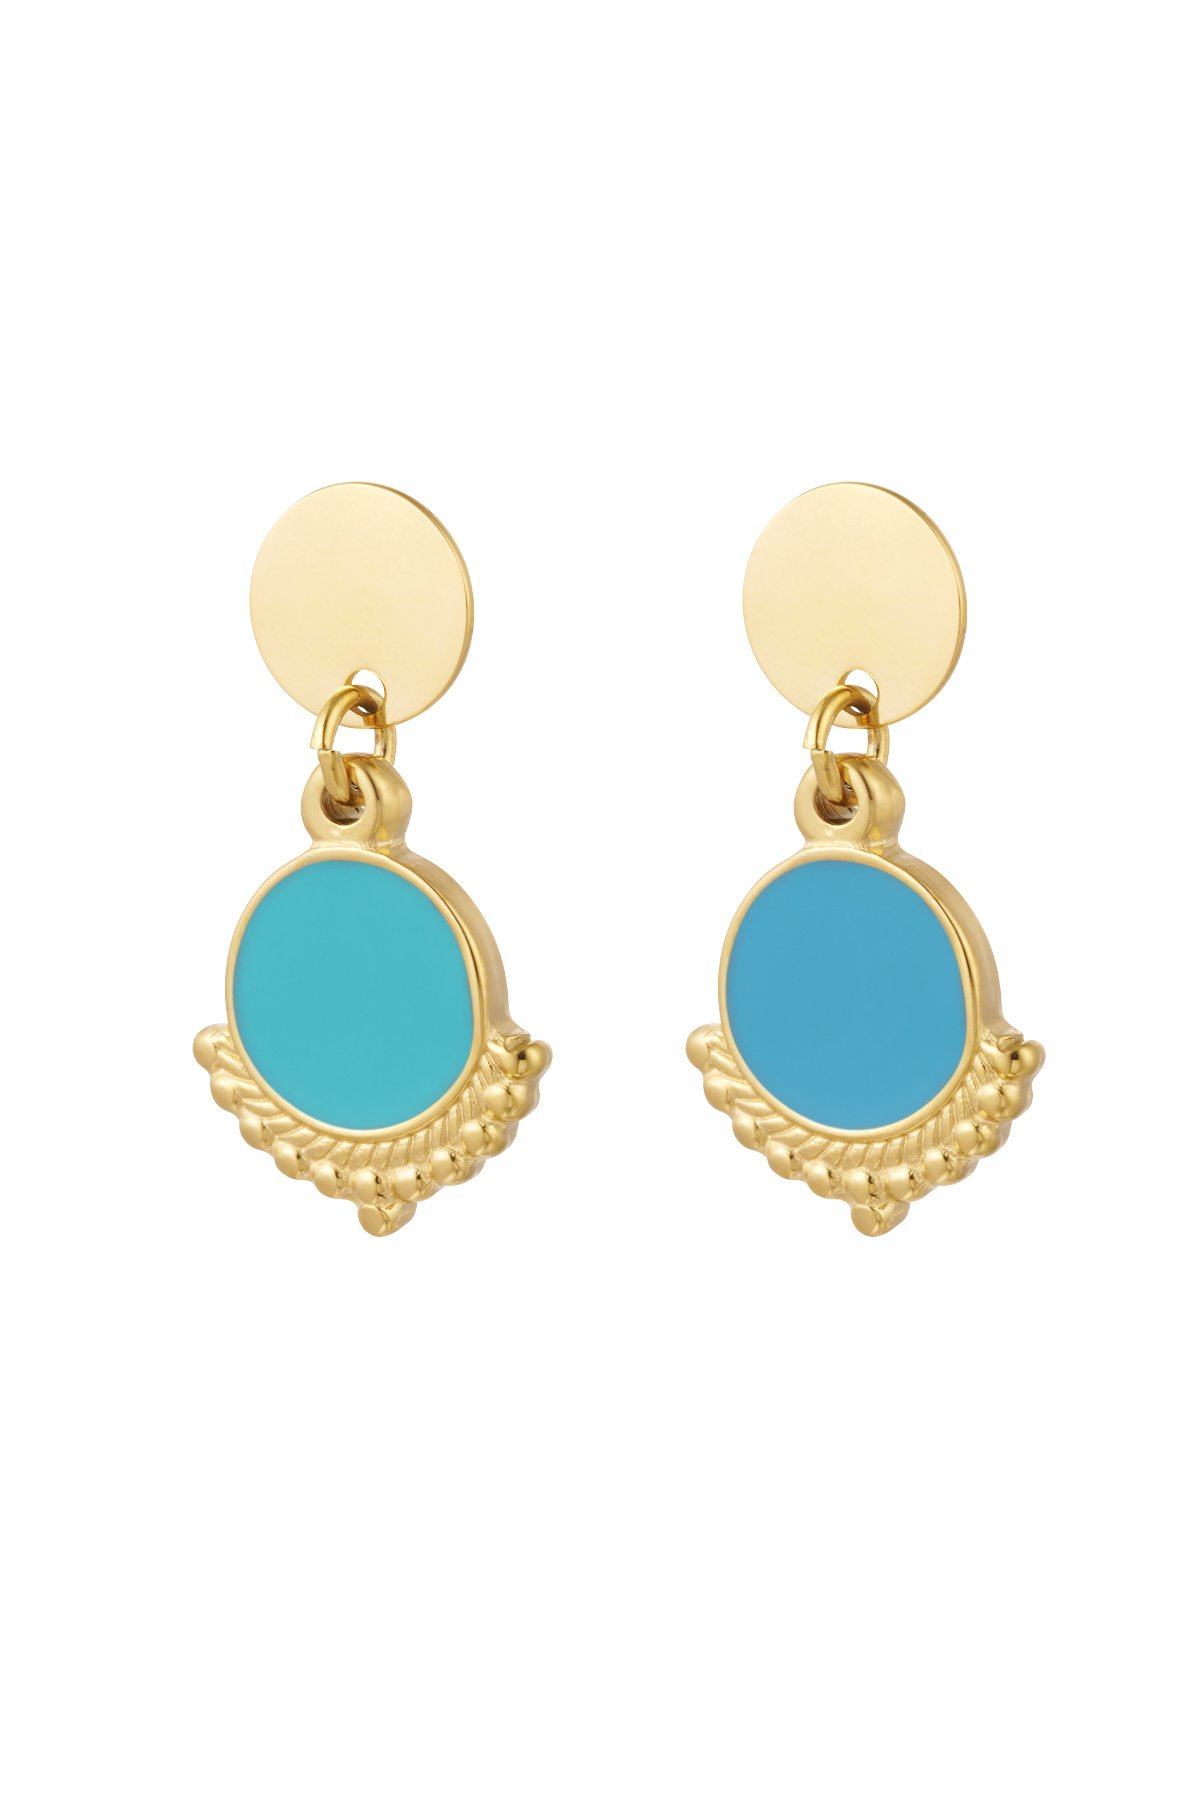 Earrings elegant with color - gold/blue 